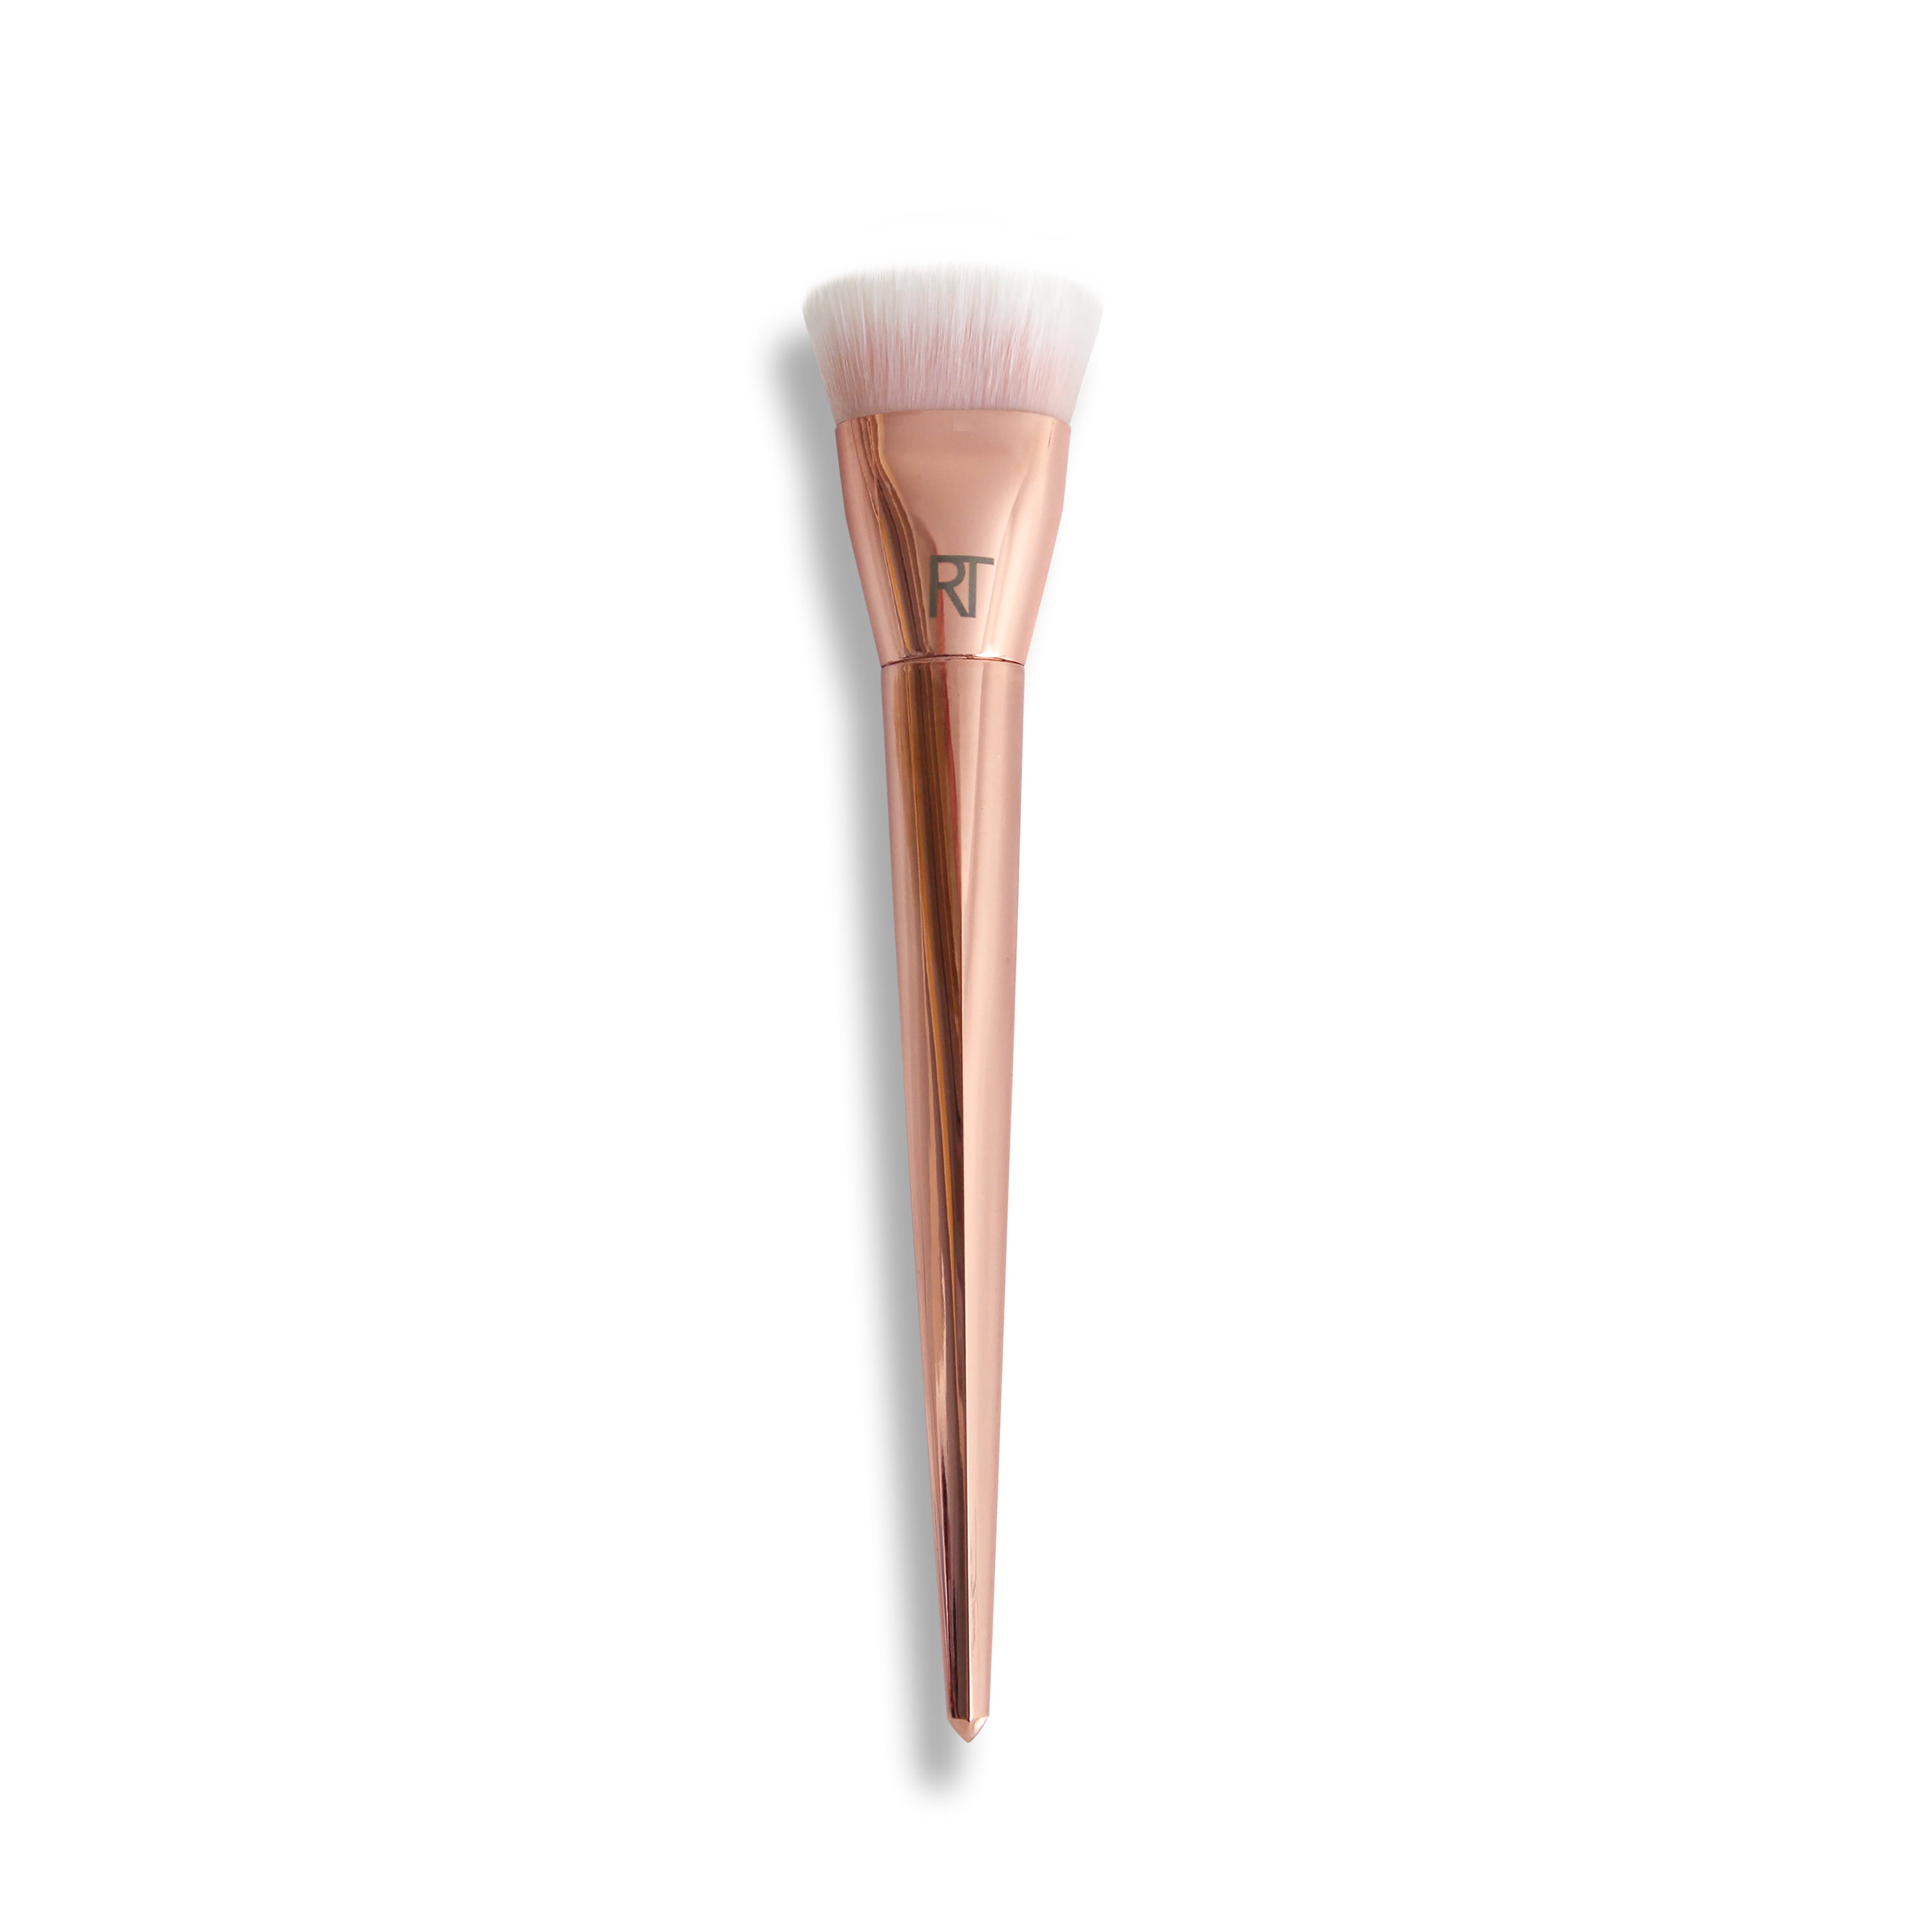 Real Techniques Bold Metals Collection 301 Flat Contour Brush